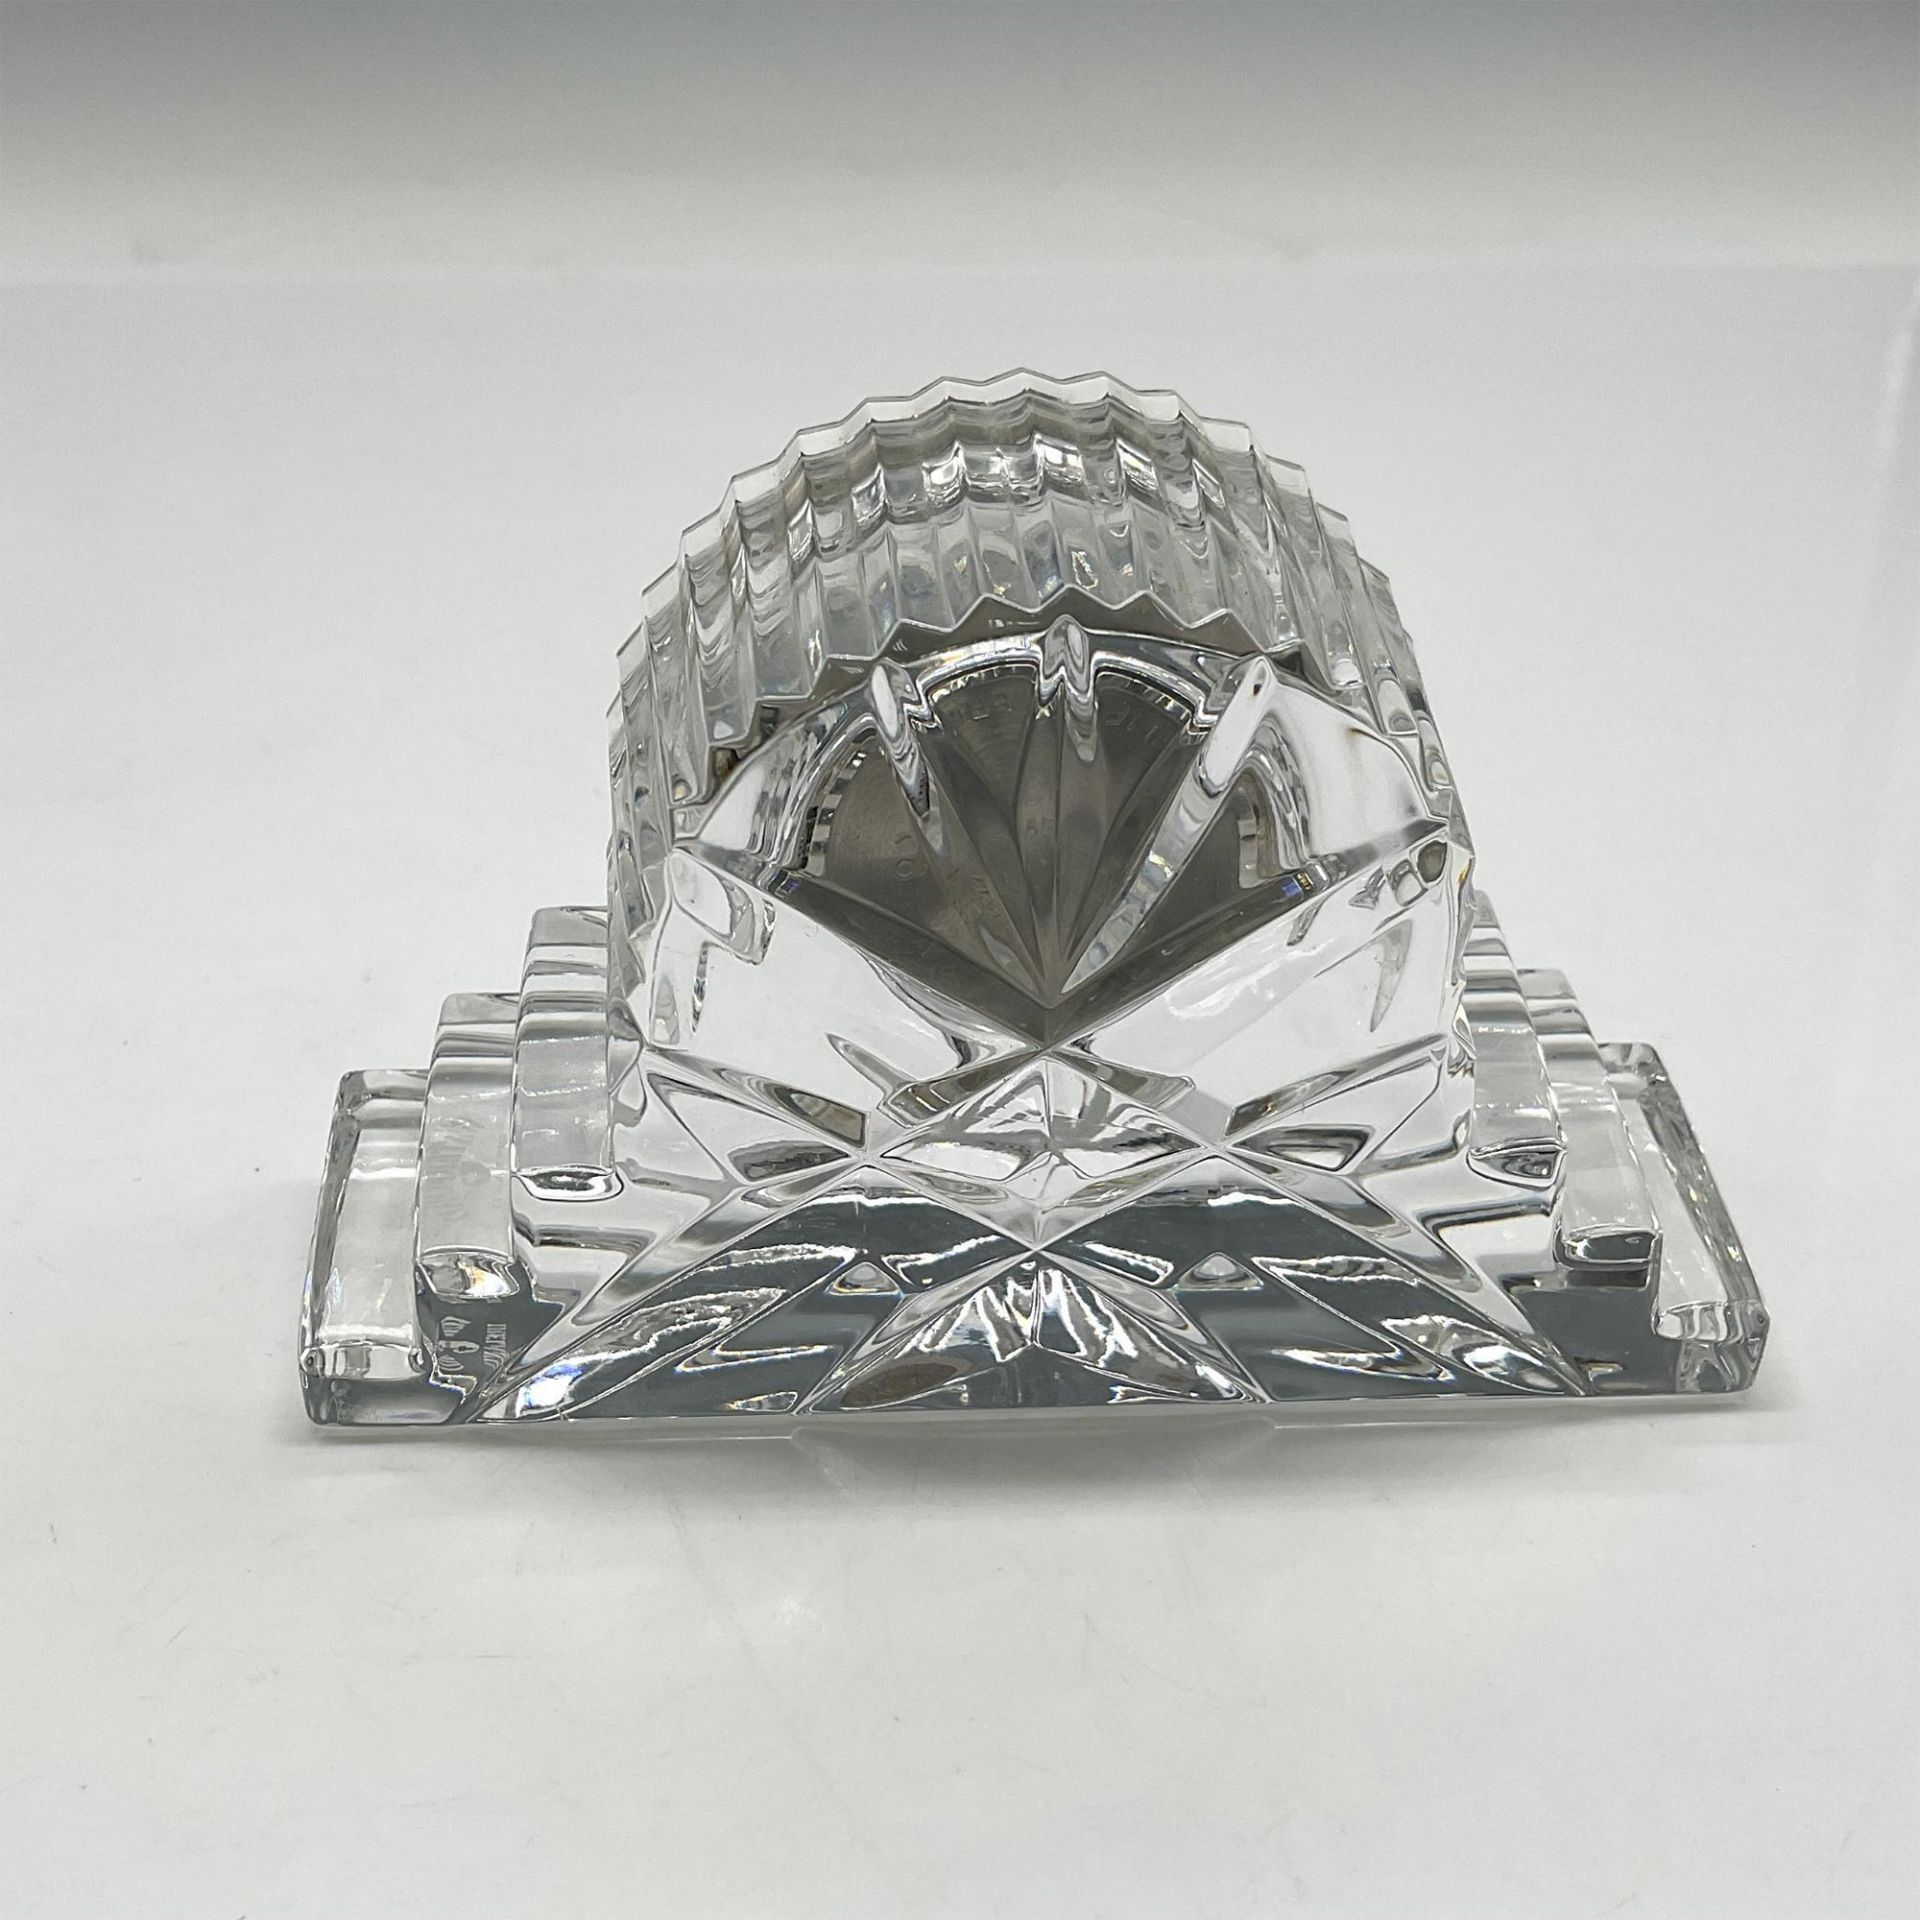 Waterford Crystal Table Clock - Image 3 of 4